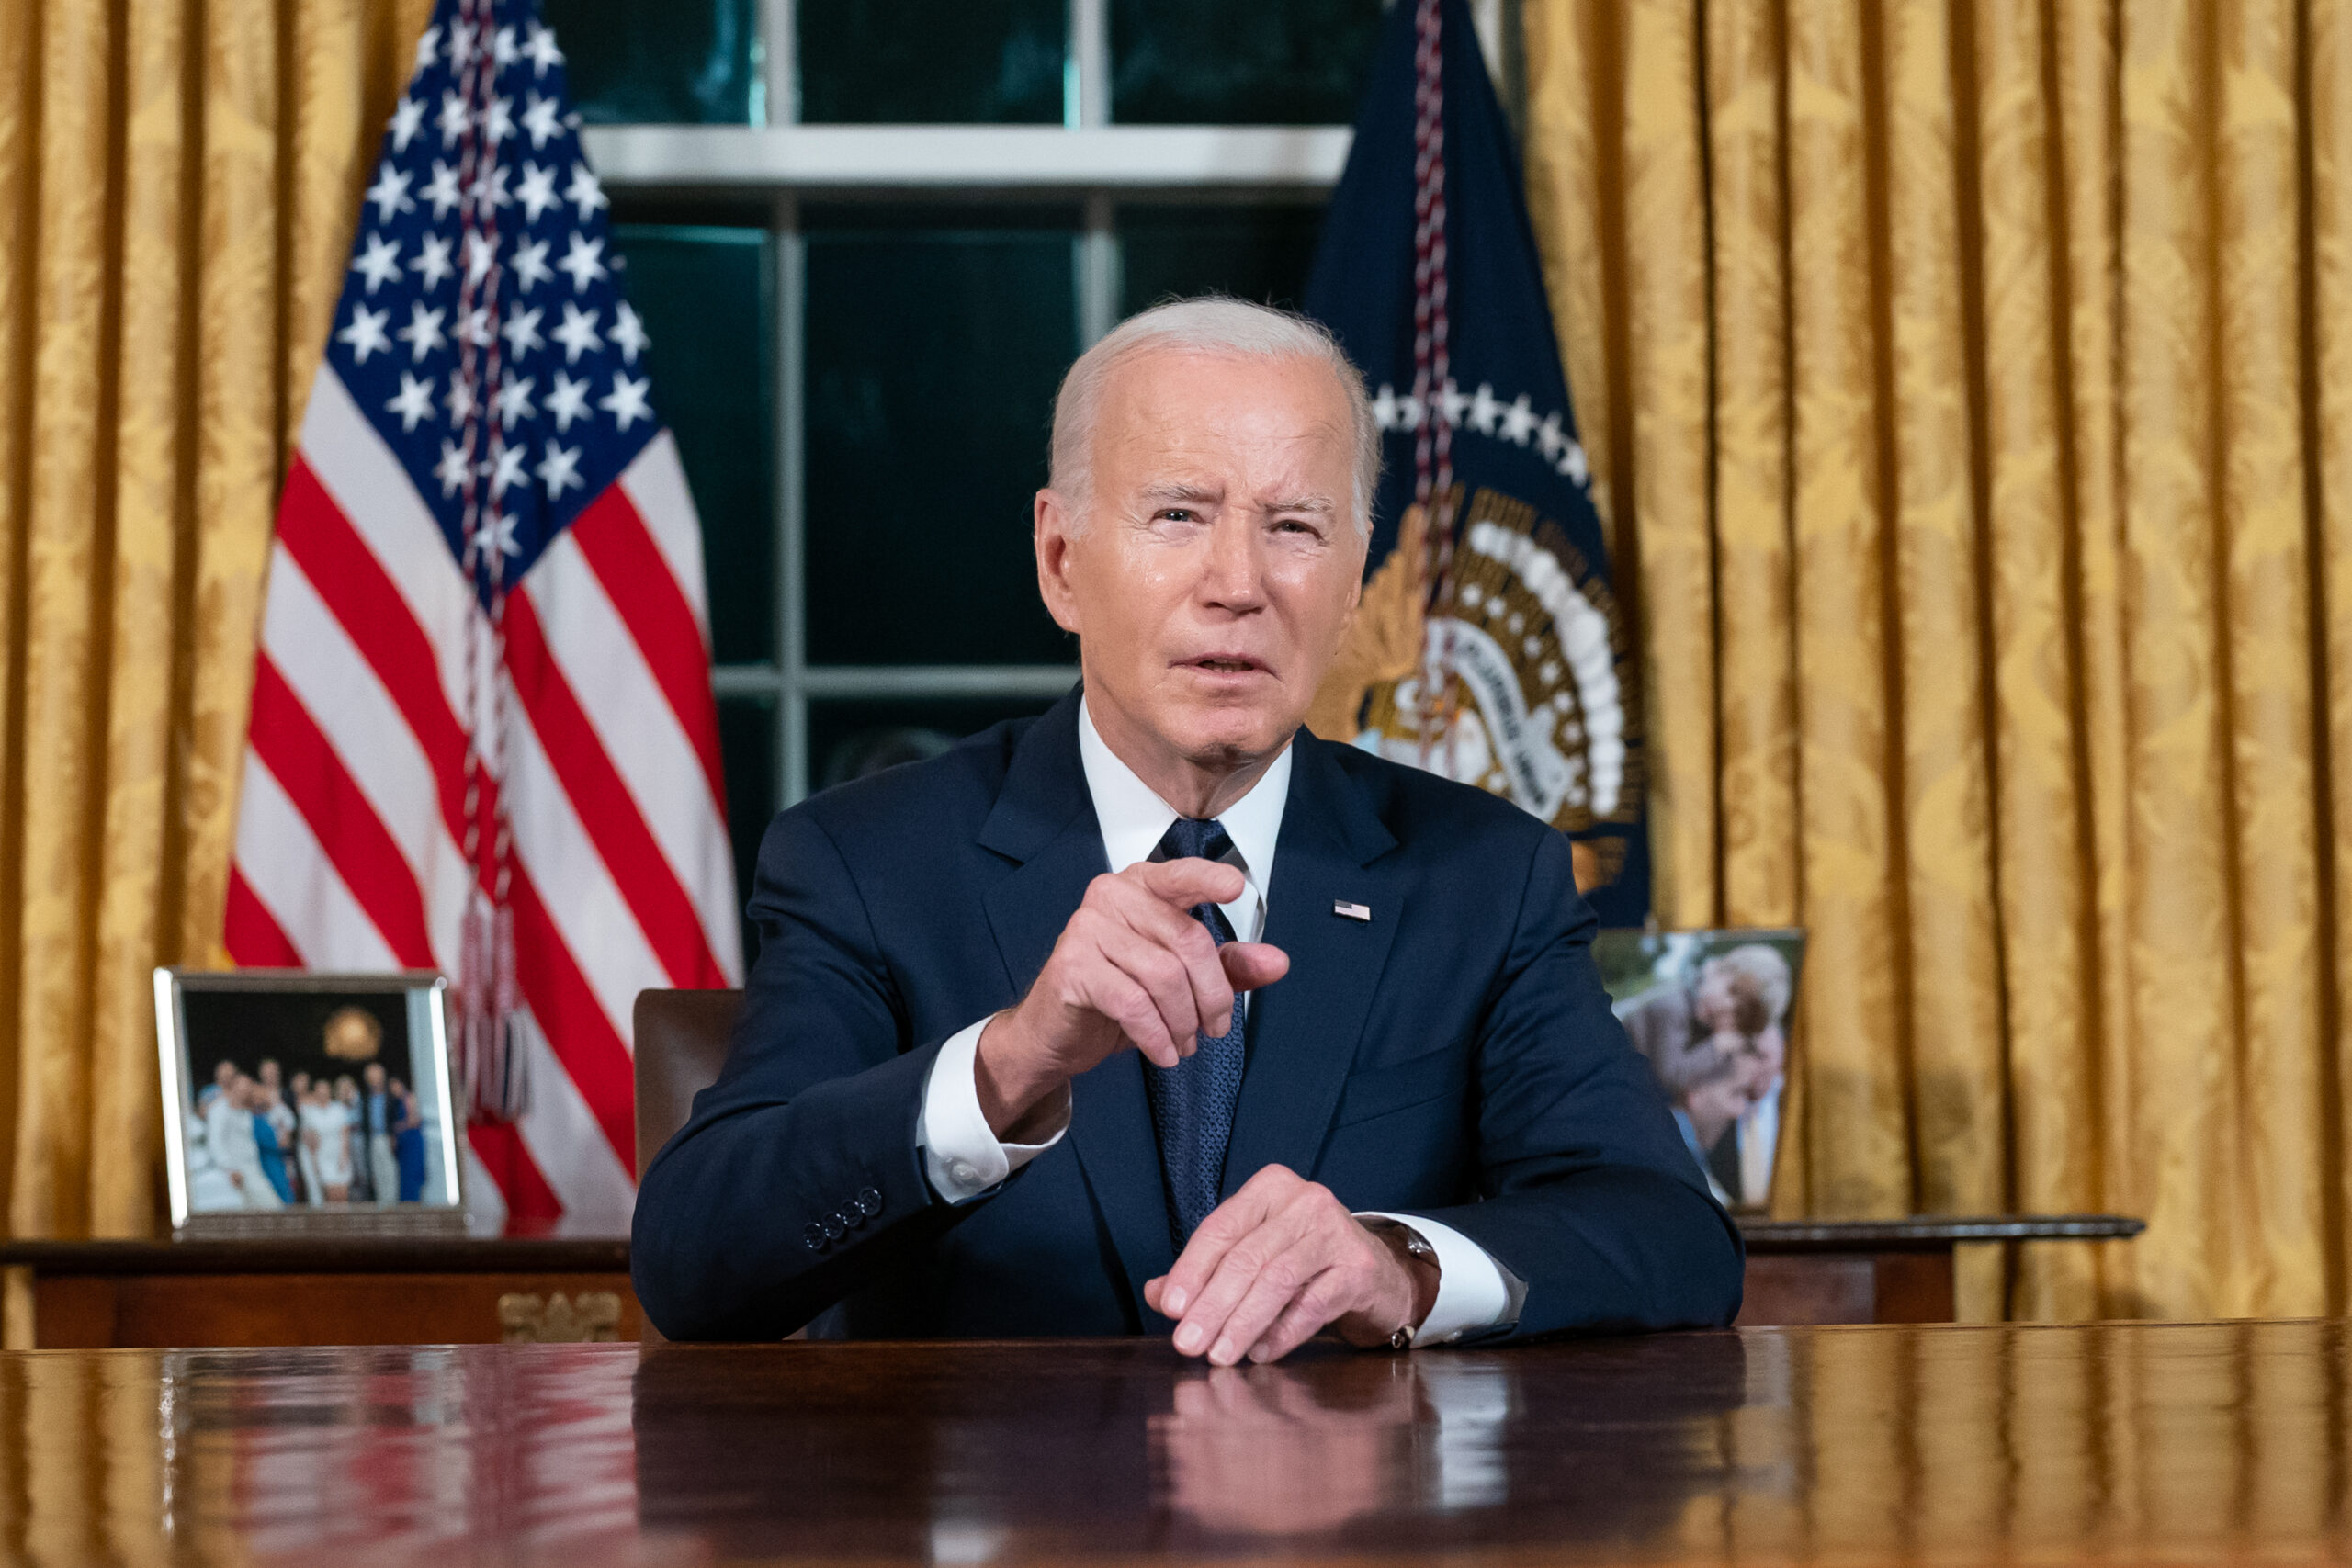 Running Cover For Biden’s Senility Is The Umpteenth Example Of How Media Interfere In Elections